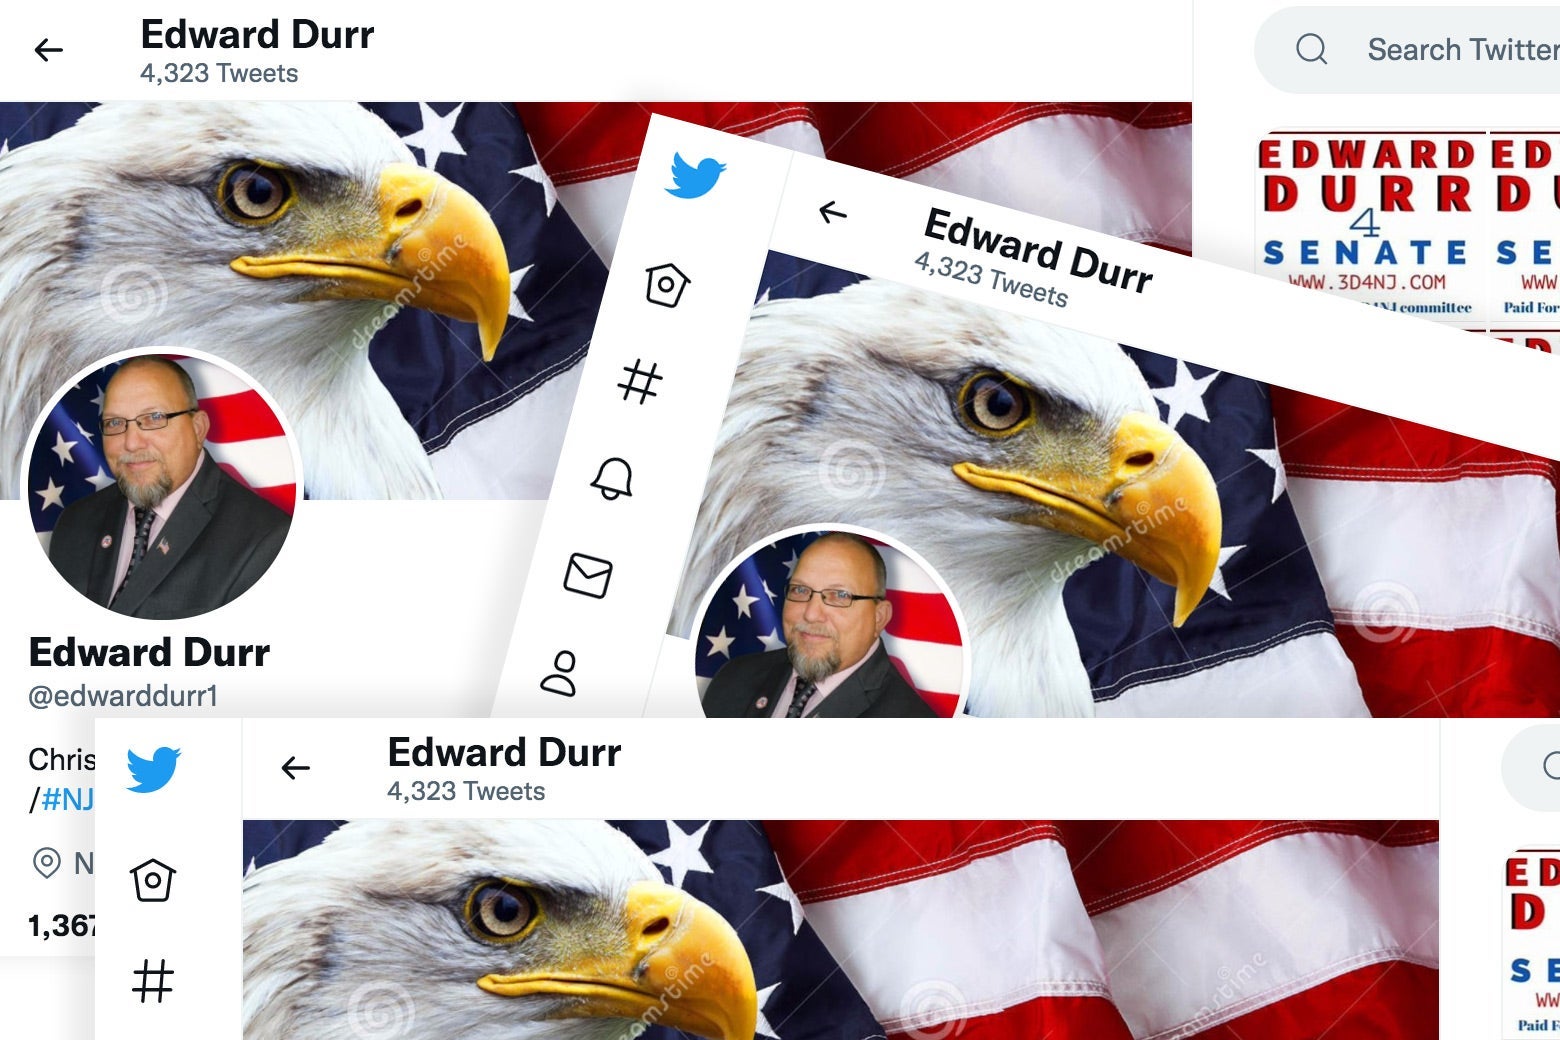 A collage of images of Edward Durr's Twitter homepage, which features his photo over images of an eagle and a U.S. flag.